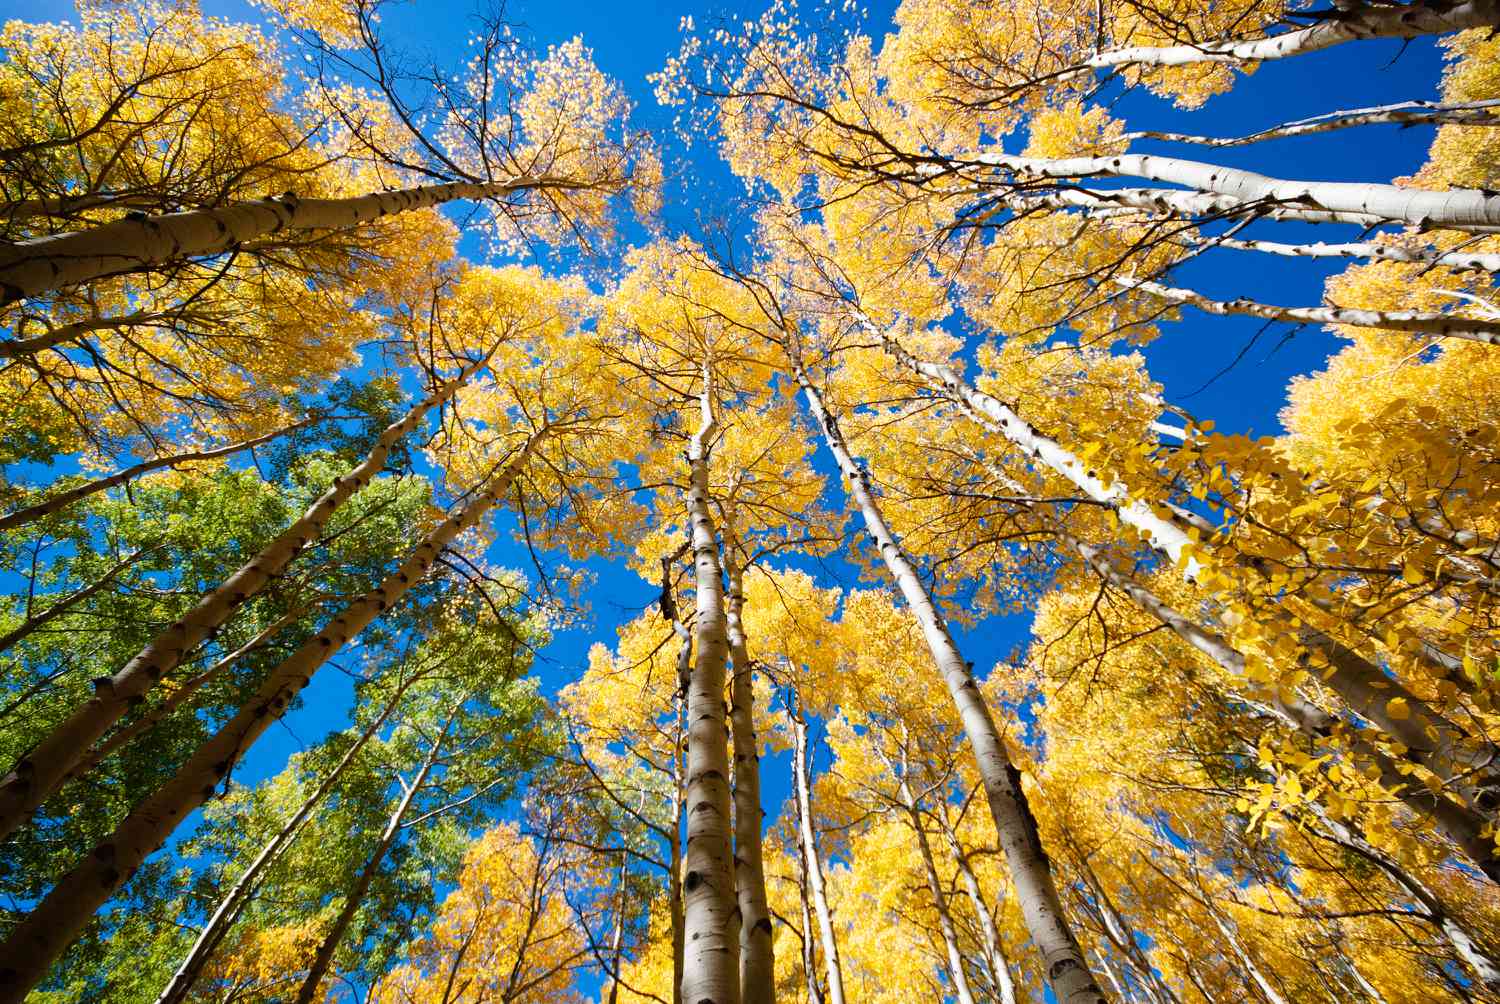 Tall Aspen trees with white and thin trunks and yellow tree canopies against blue sky